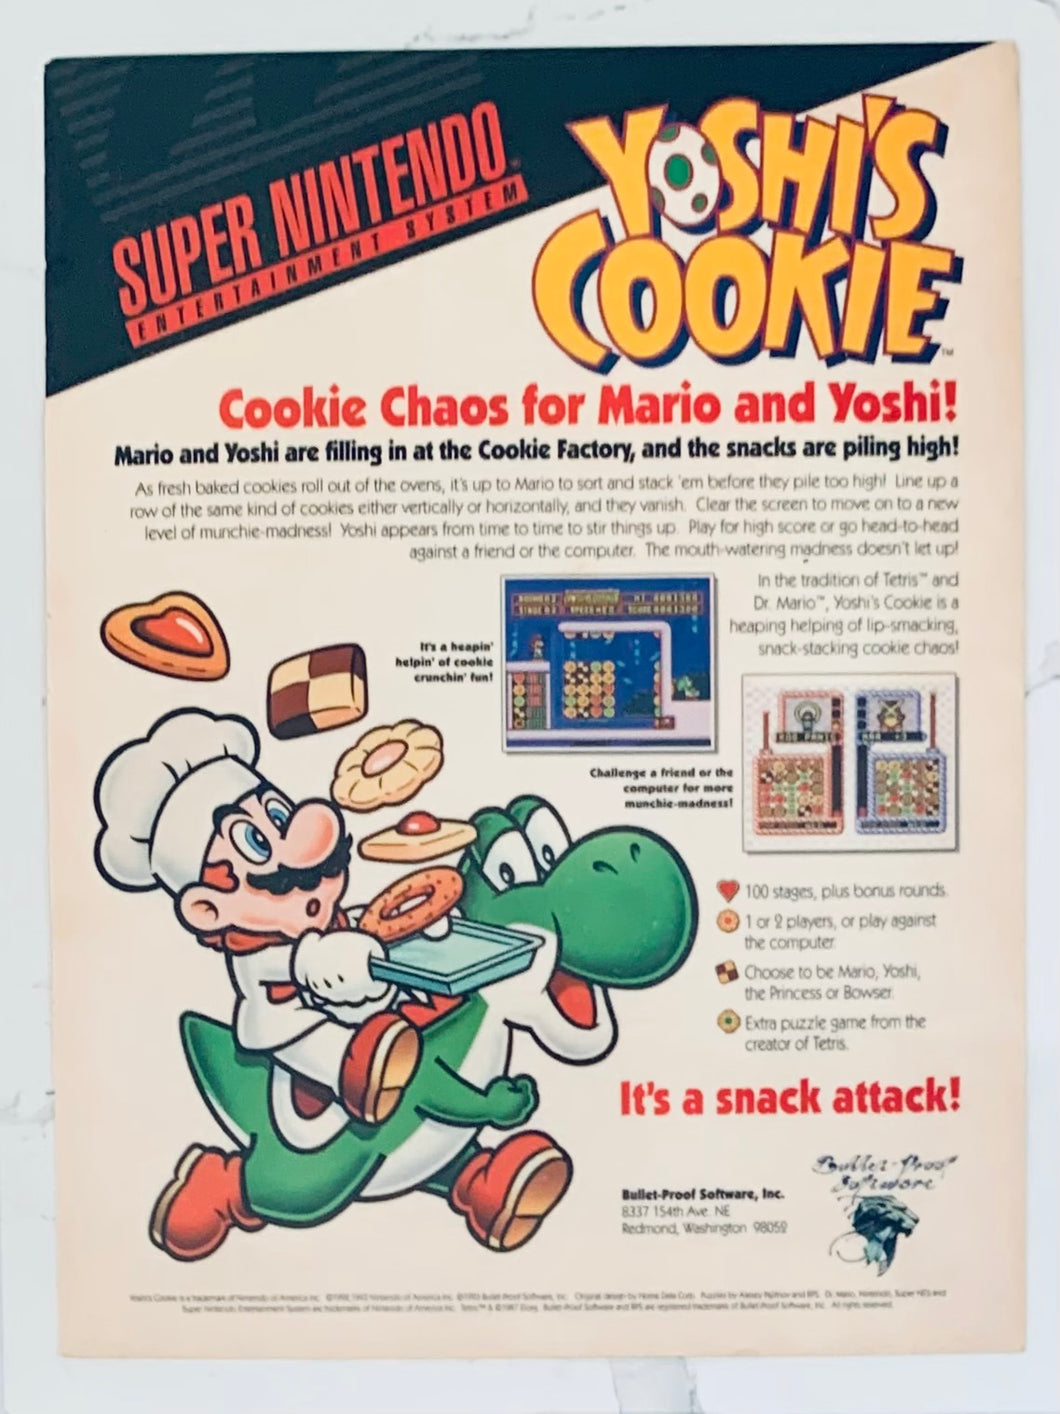 Yoshi’s Cookie - SNES - Original Vintage Advertisement - Print Ads - Laminated A4 Poster